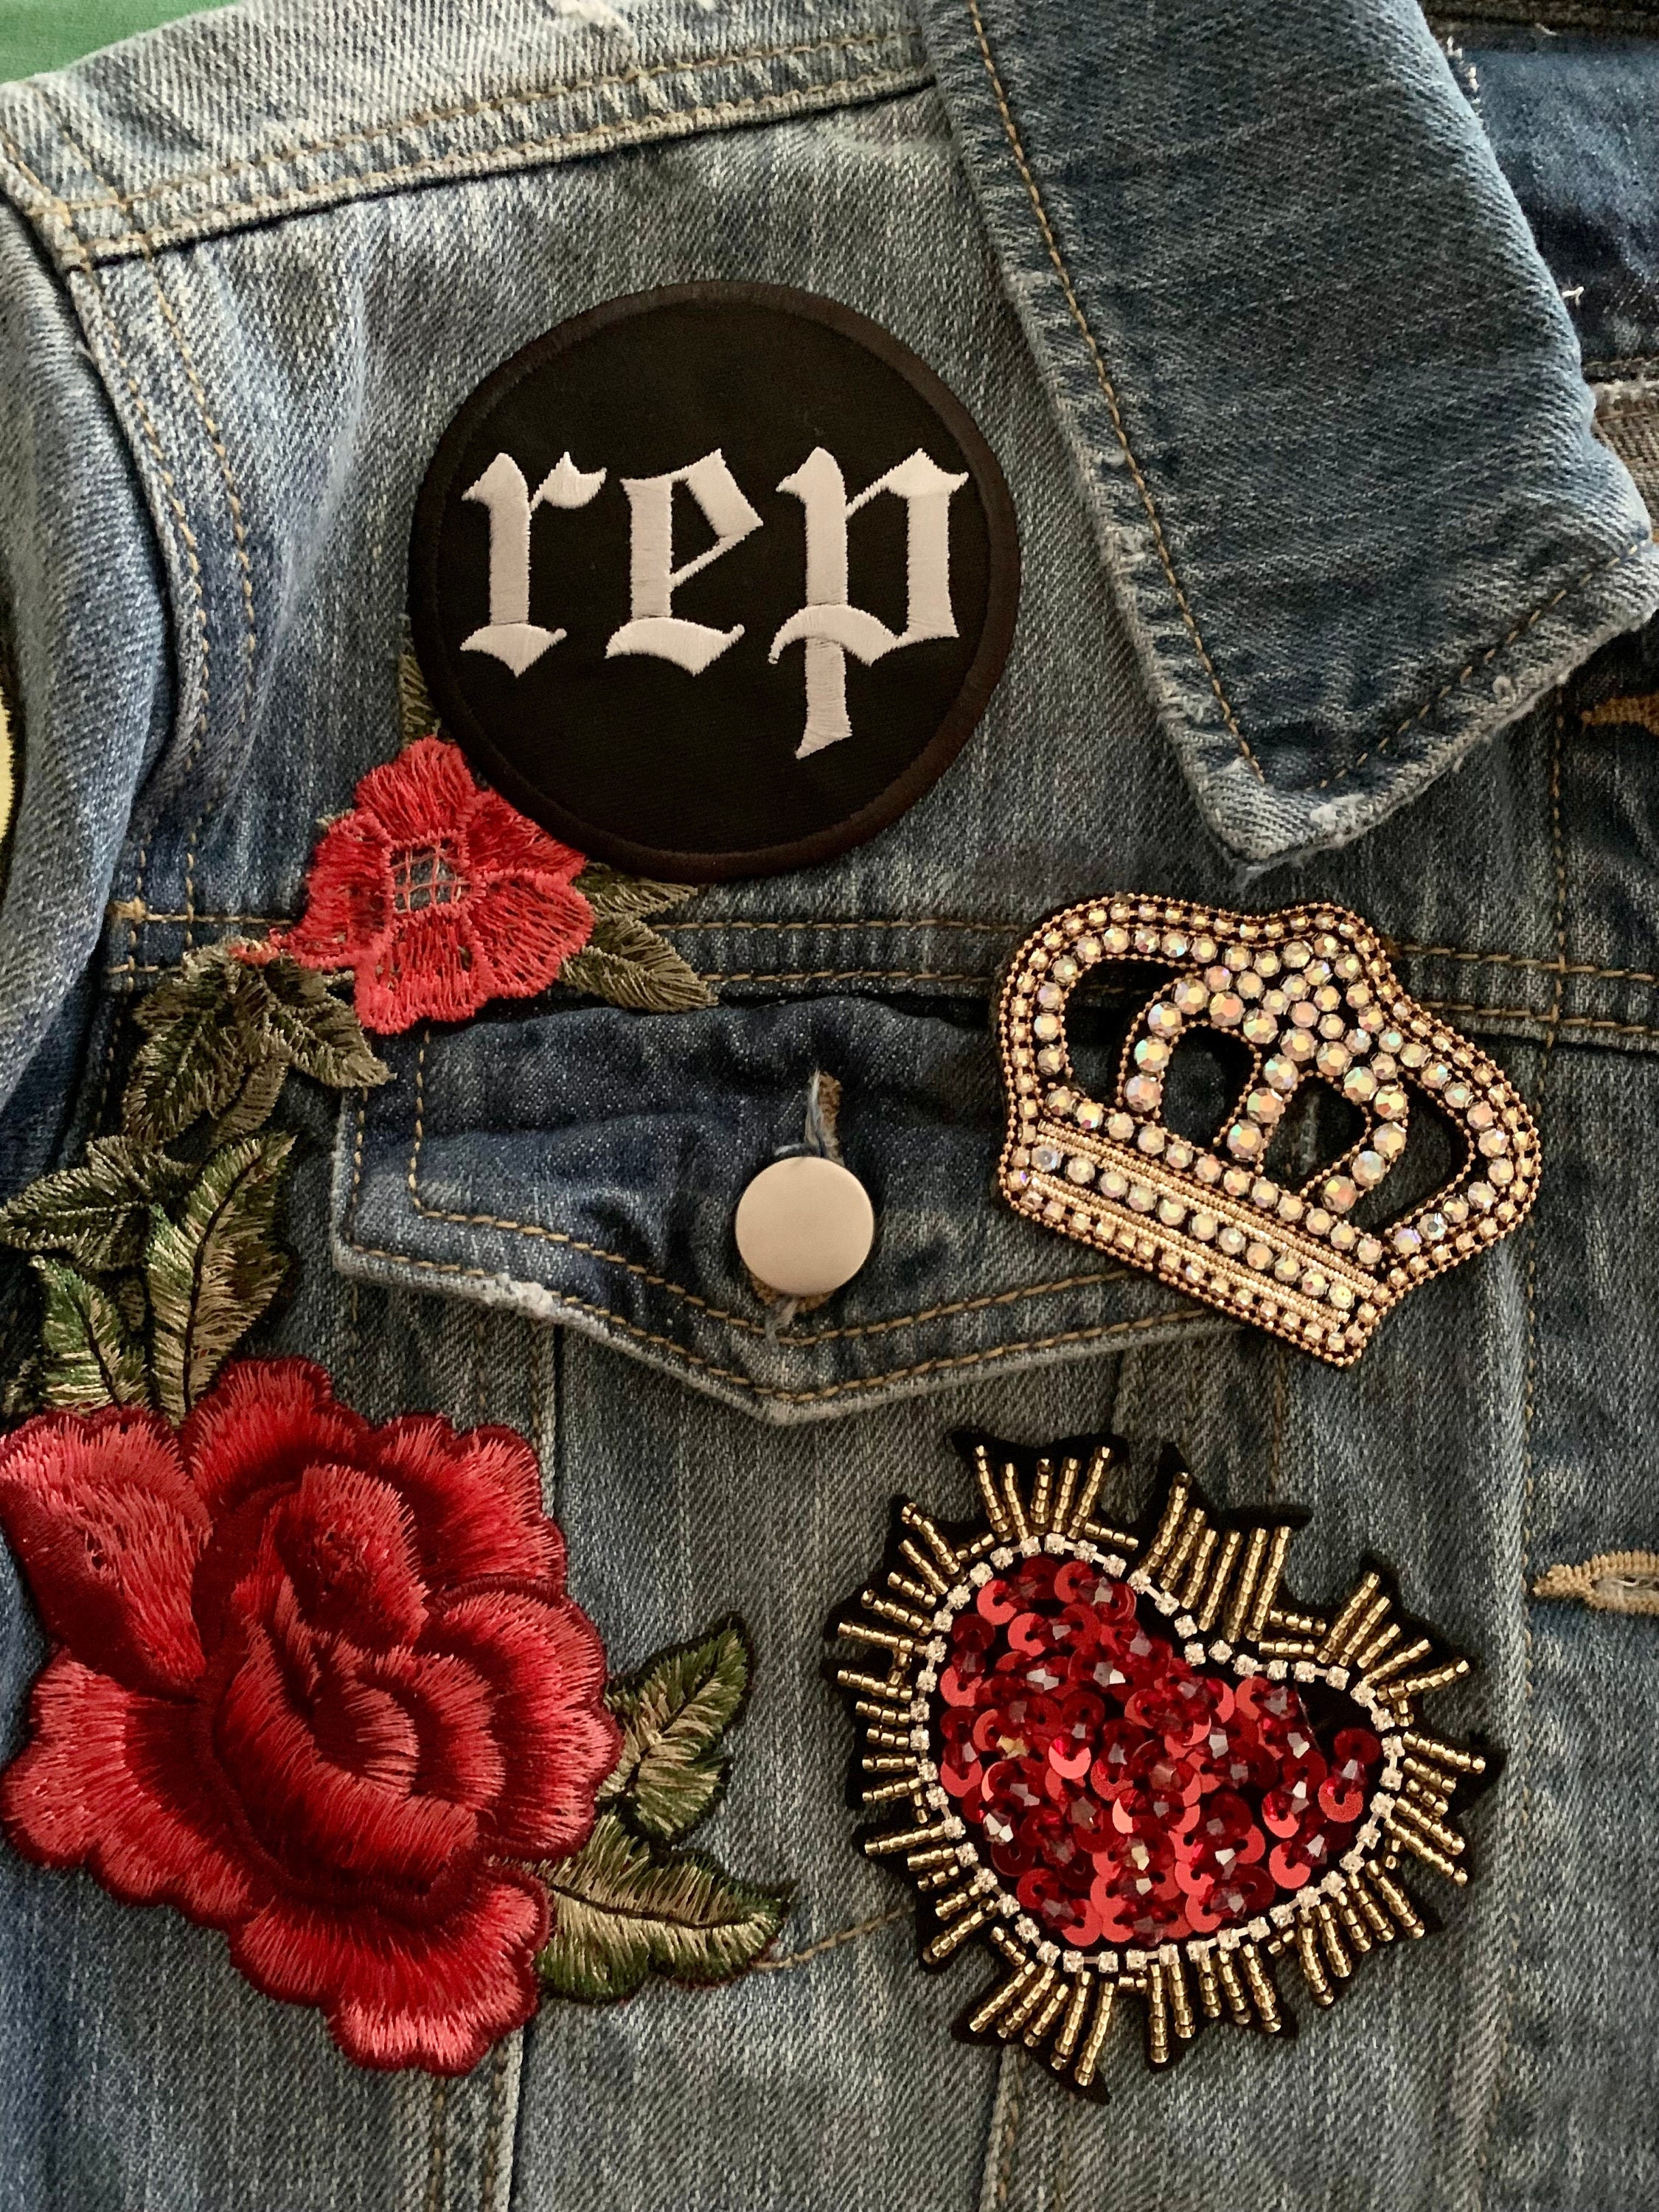 does anyone know how much these rep patches are selling for